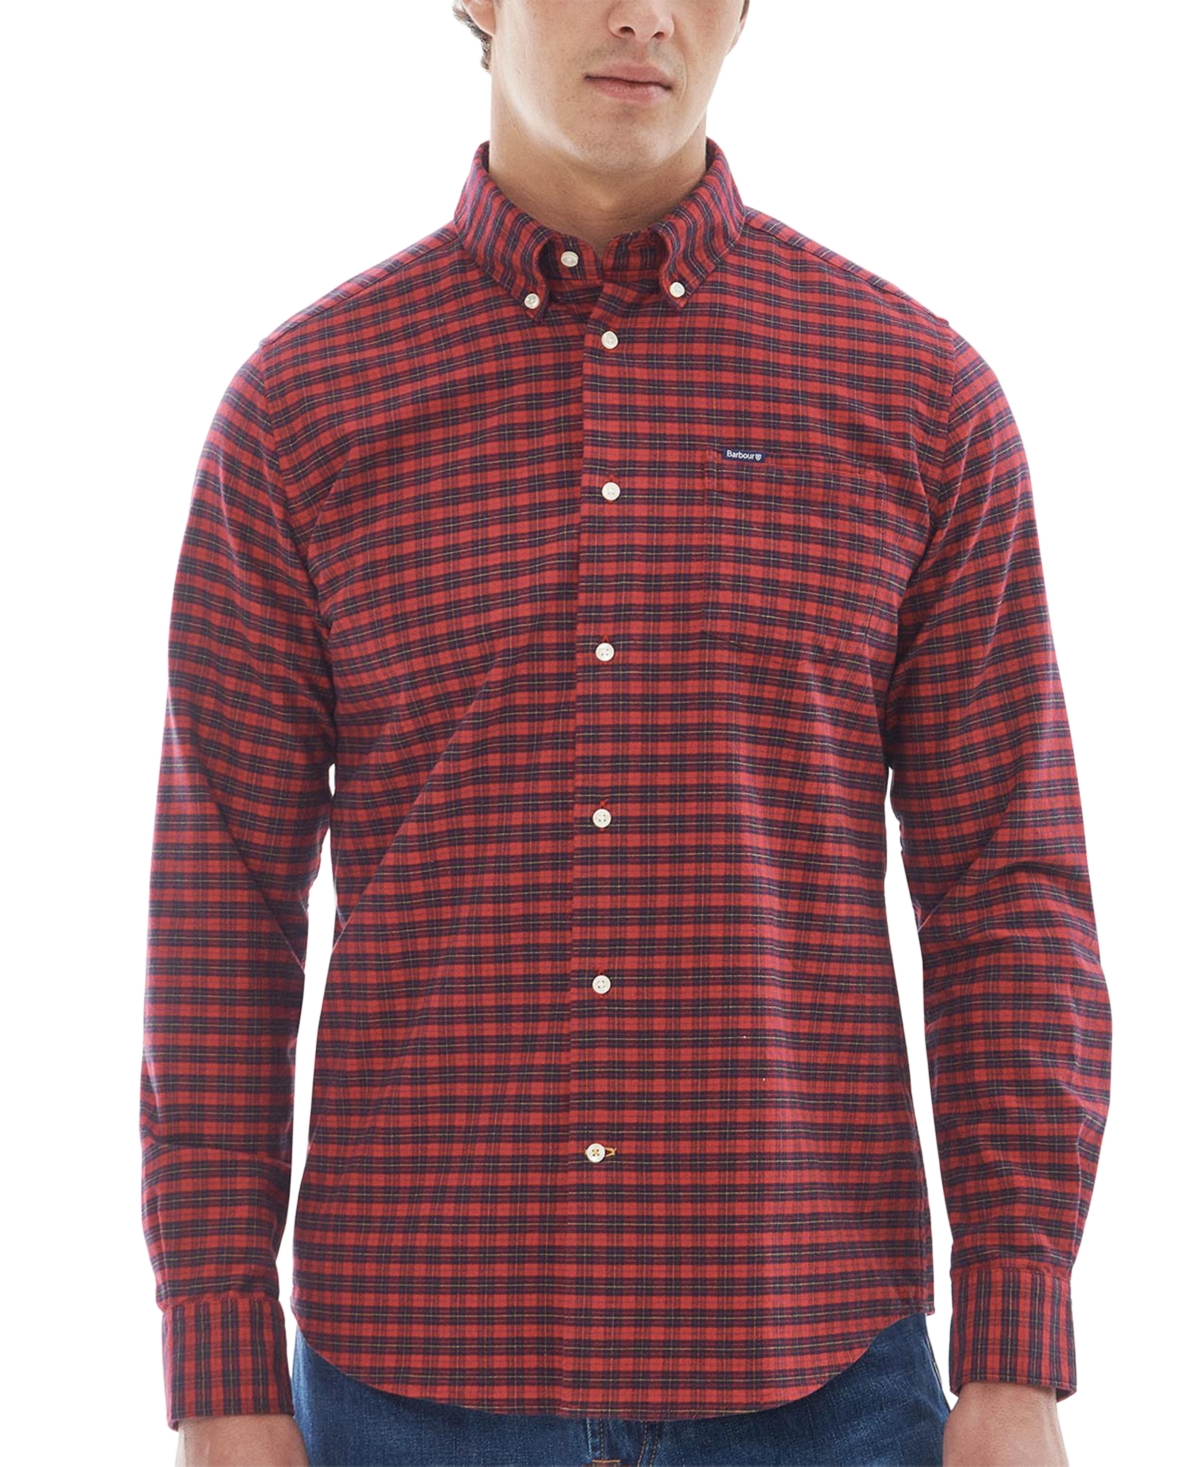 Men's Emmerson Tailored-Fit Highland Check Button-Down Oxford Shirt - Red